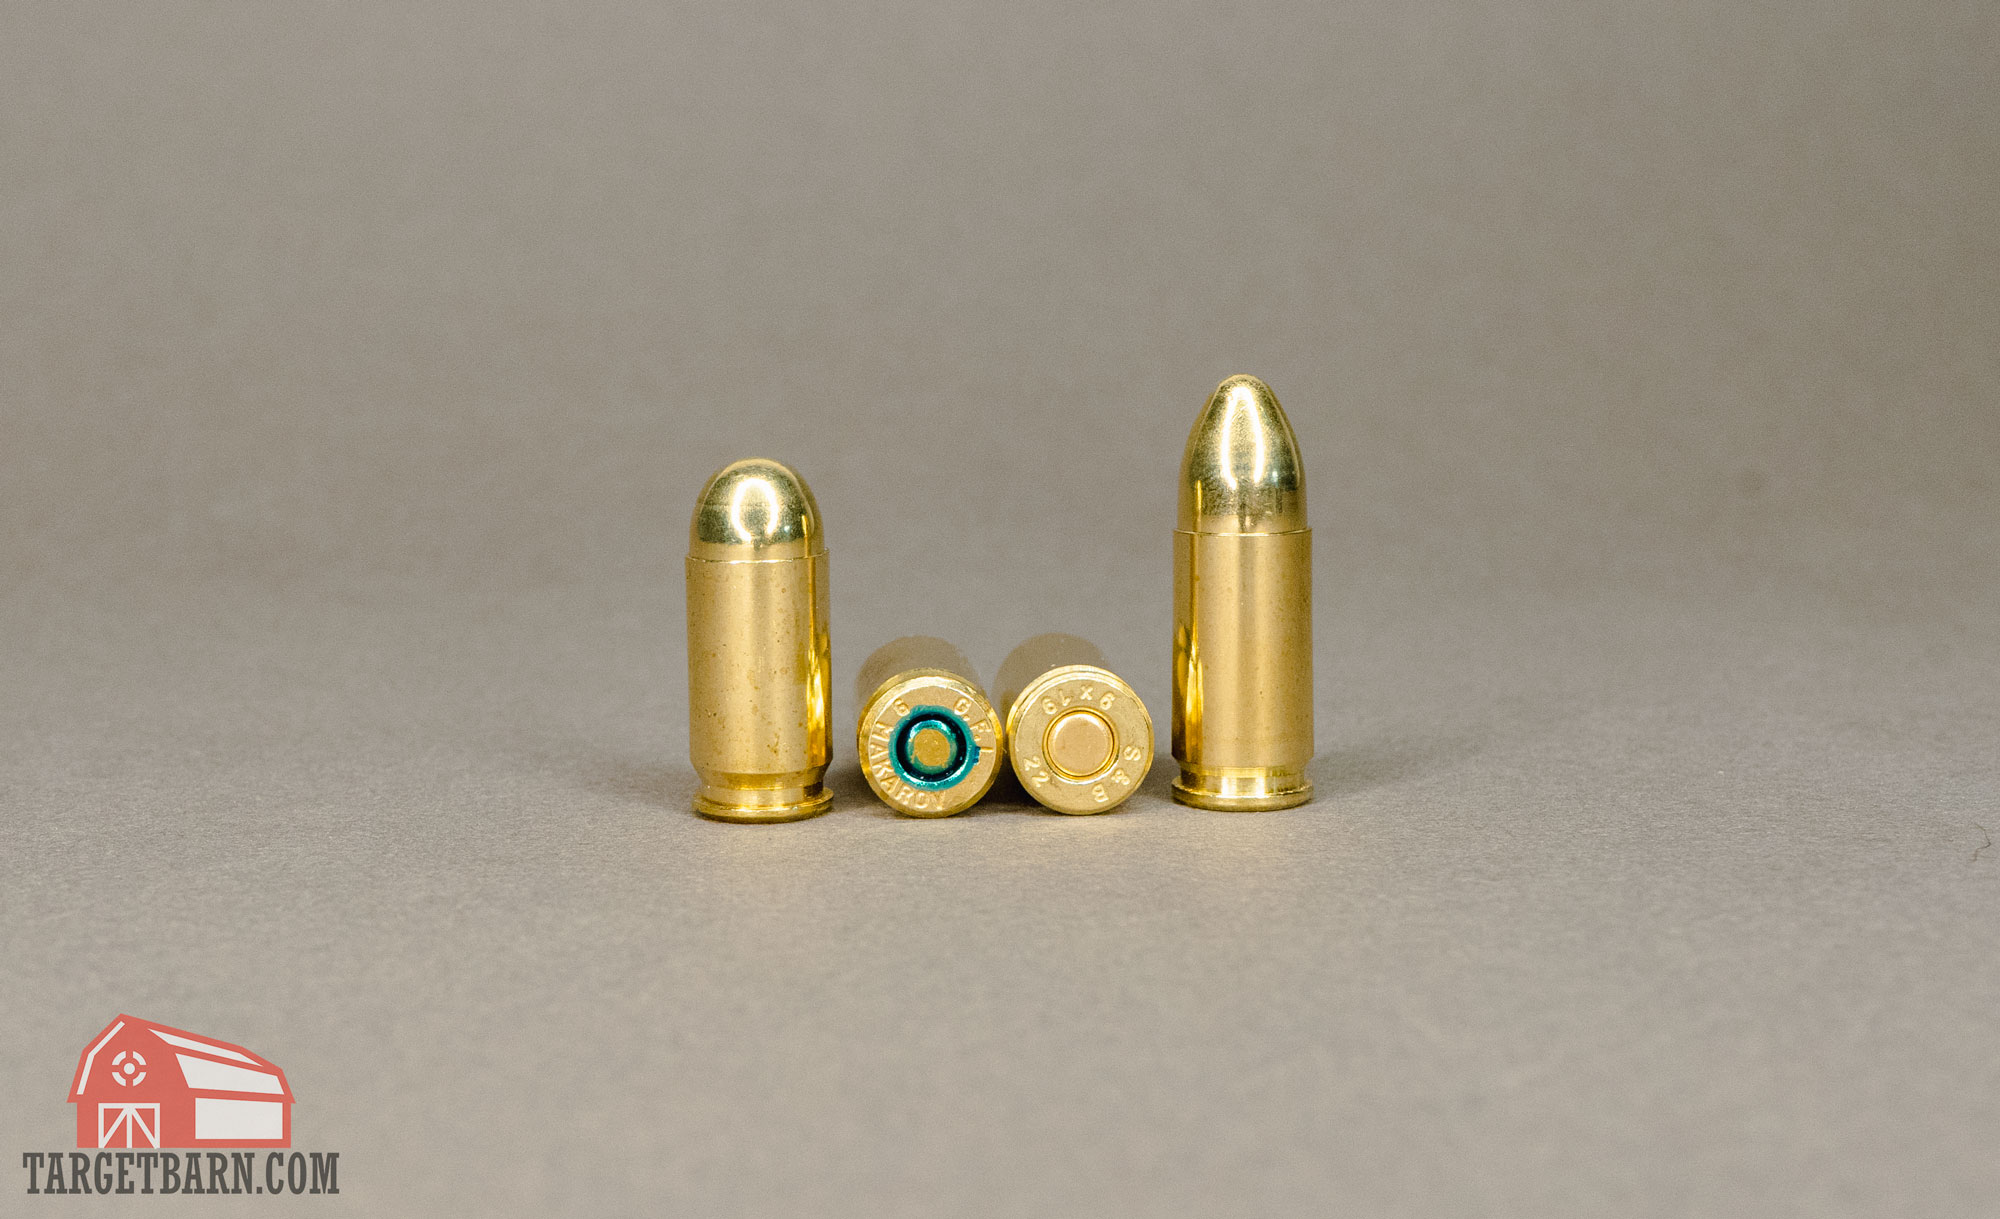 two rounds of 9mm makarov next to two rounds of 9mm luger to show difference in cartridge size